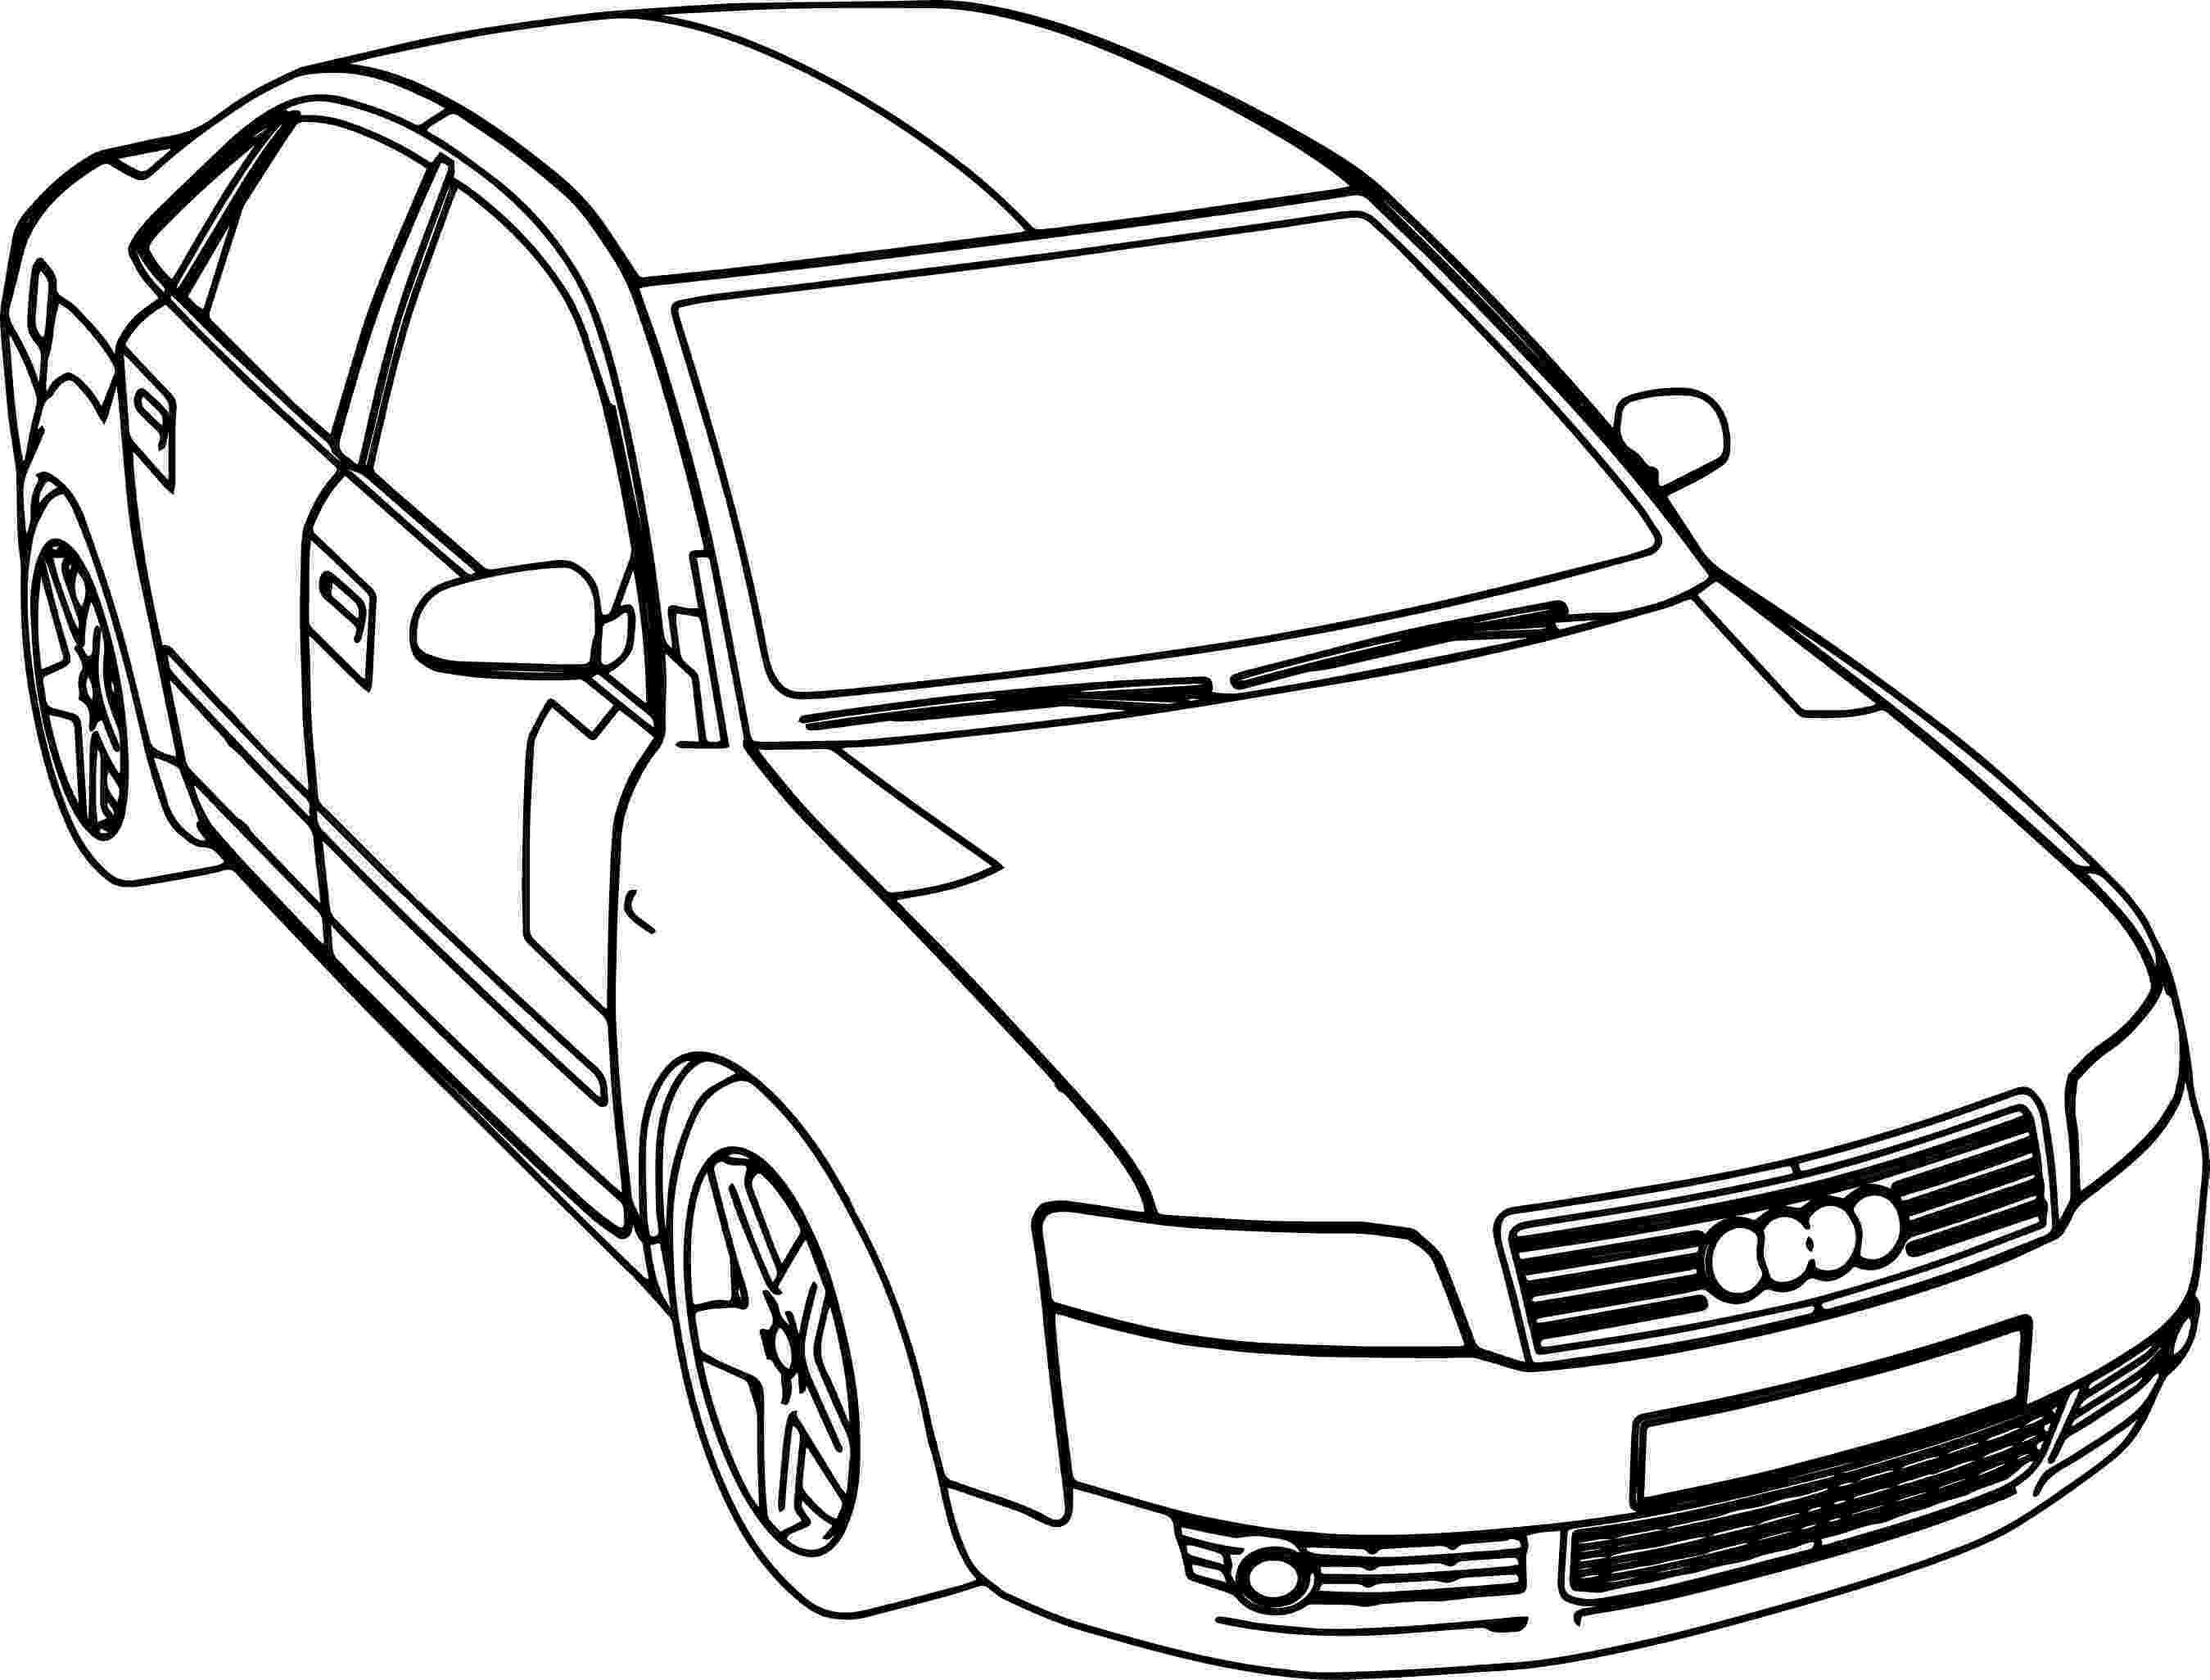 one direction colouring pages a4 2004 audi a4 engine diagram sketch coloring page one colouring a4 pages direction 